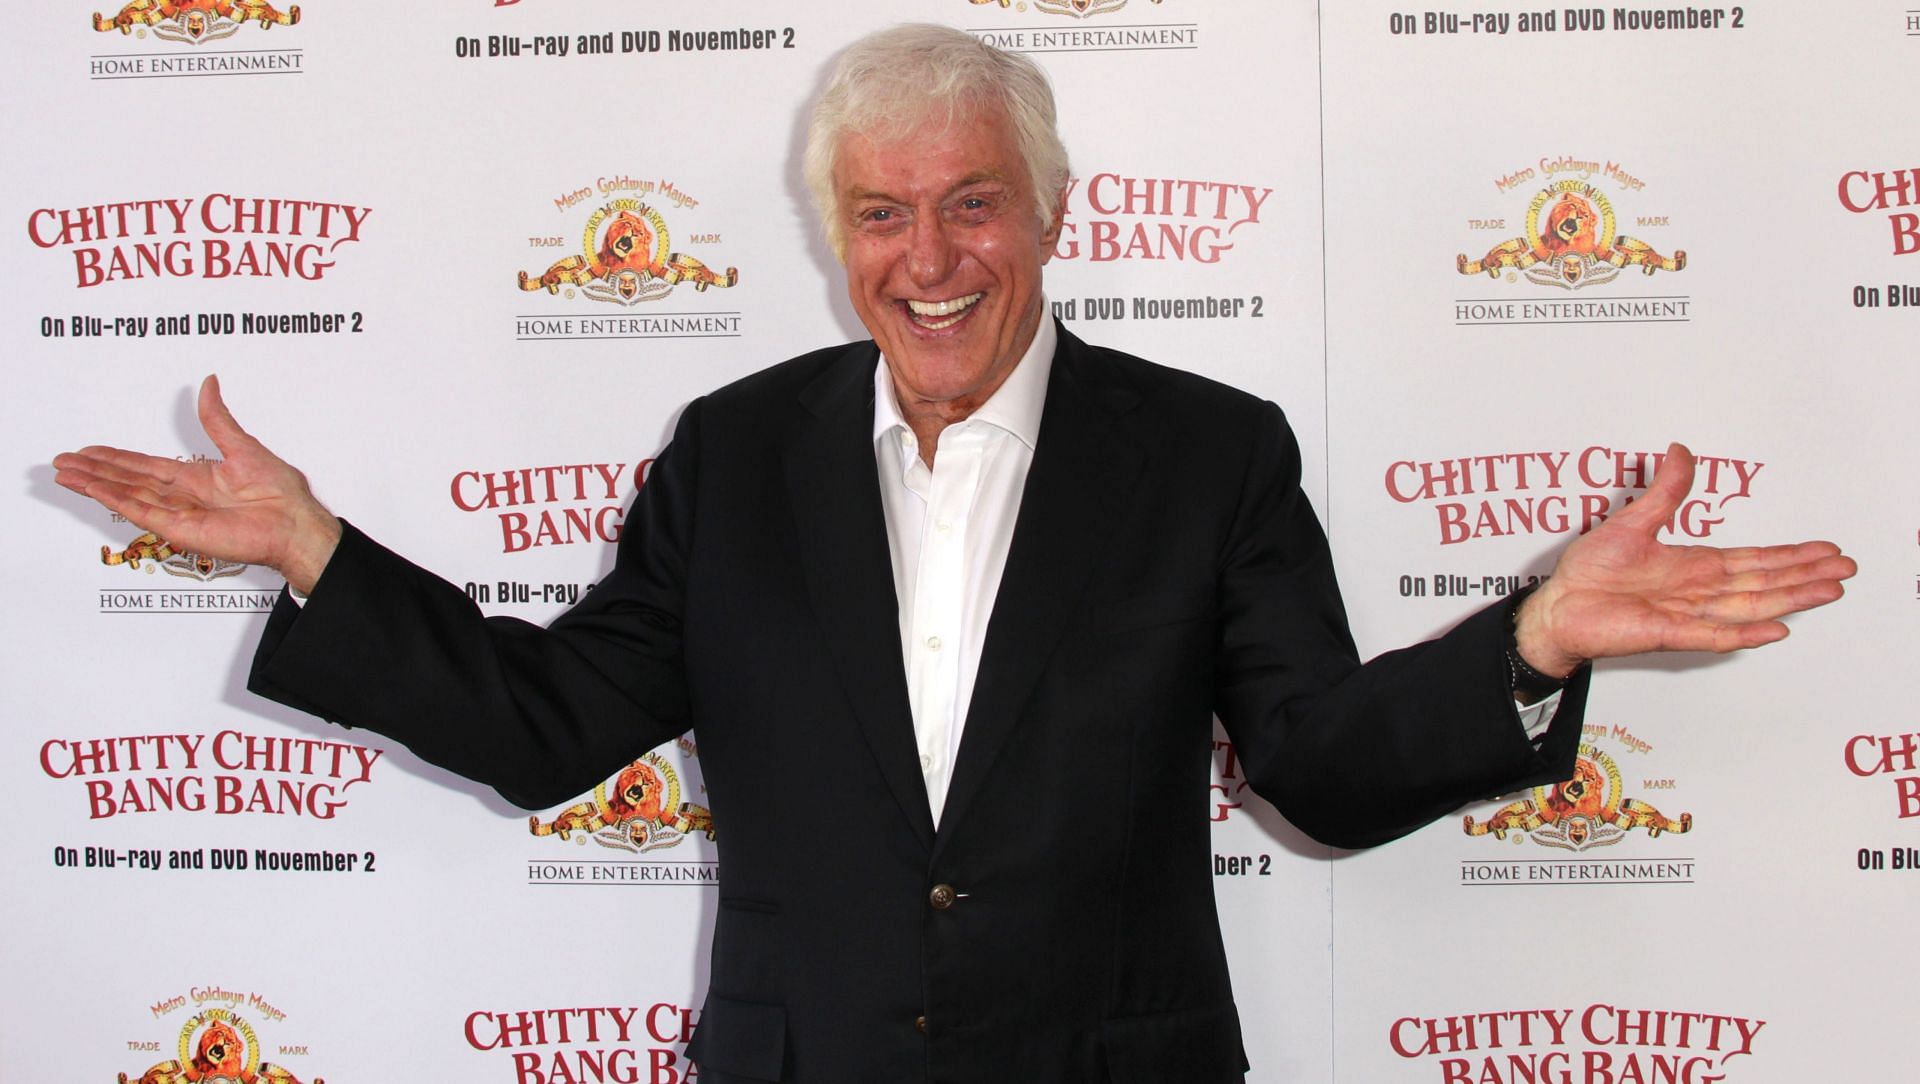 While Dick Van Dyke recognizes the difficulties of aging, he&#039;s appreciative for the abilities he retains. (Getty)